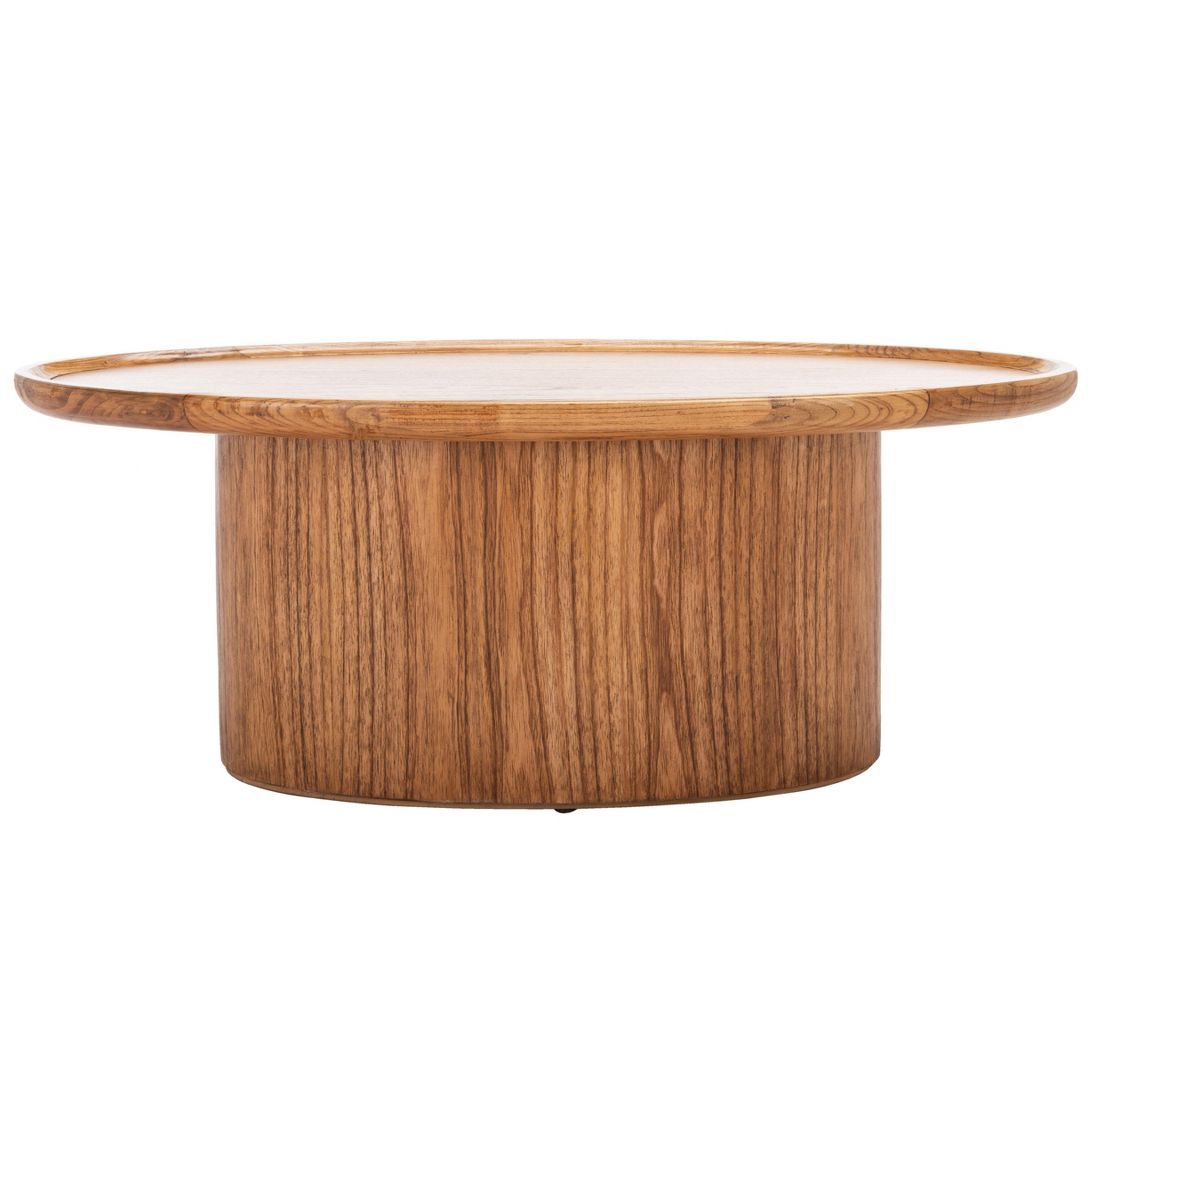 Flyte Oval Coffee Table - Natural - Safavieh. | Target